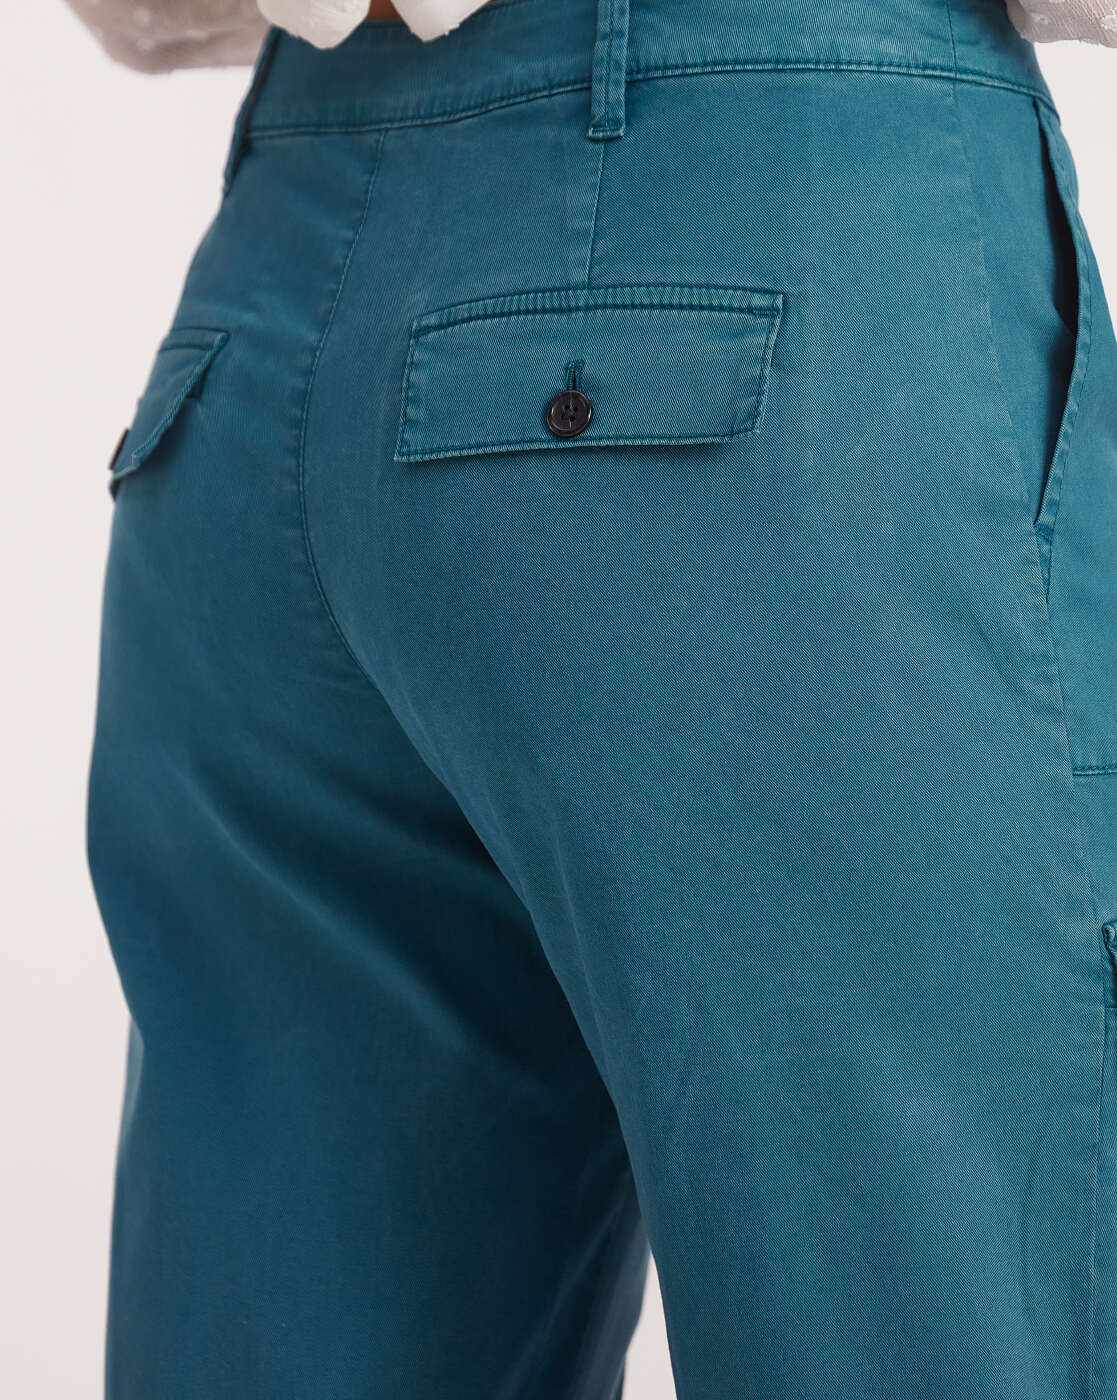 Woman Within Teal Cargo Pants Size 22 (Plus) - 70% off